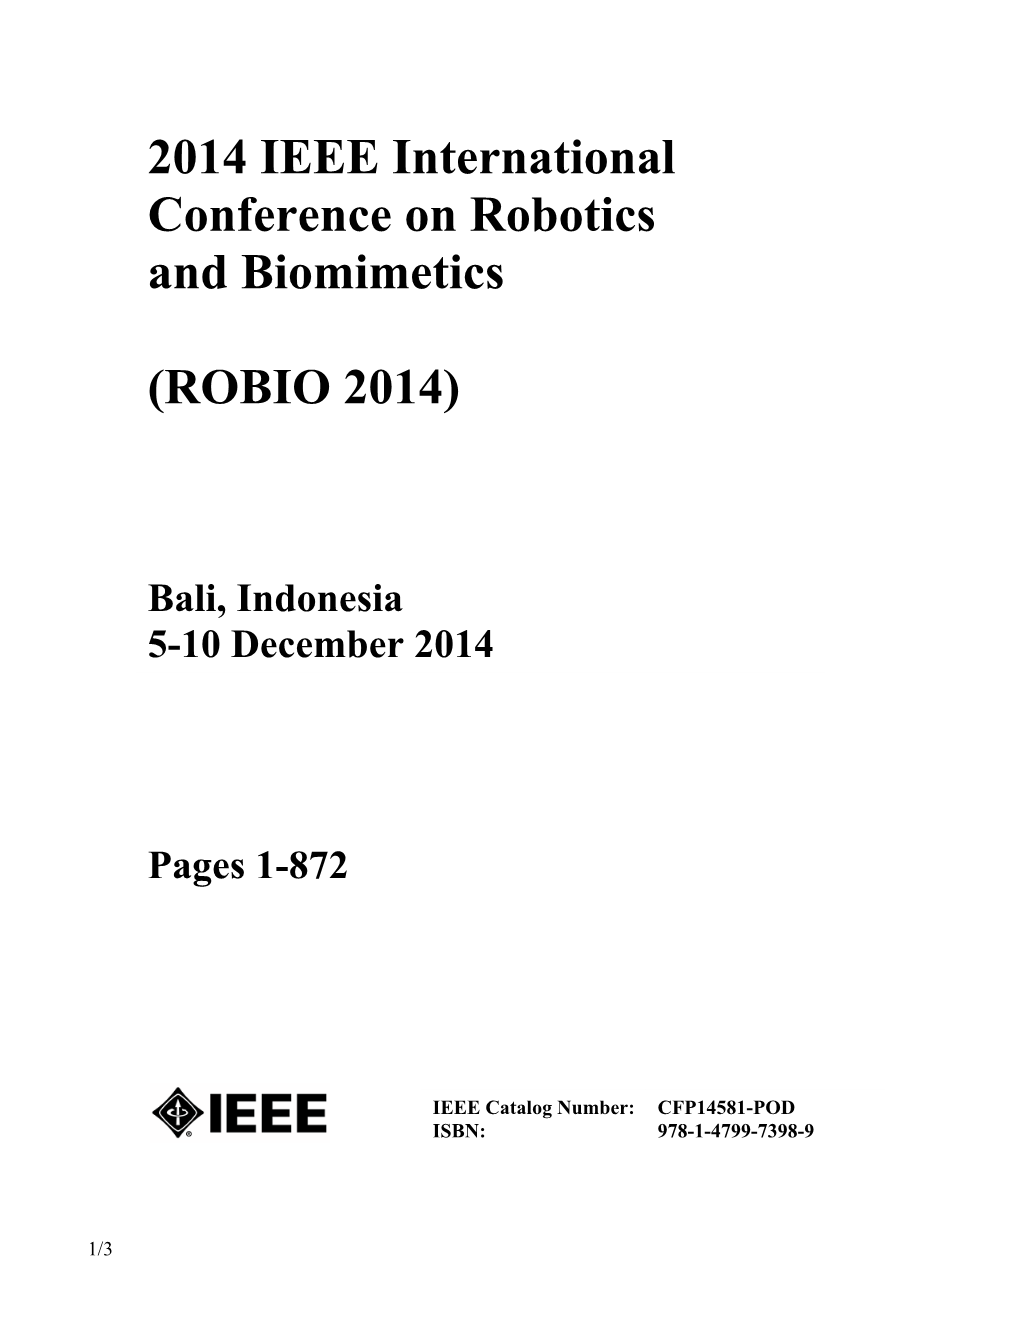 IEEE ROBIO 2014 Conference Paper